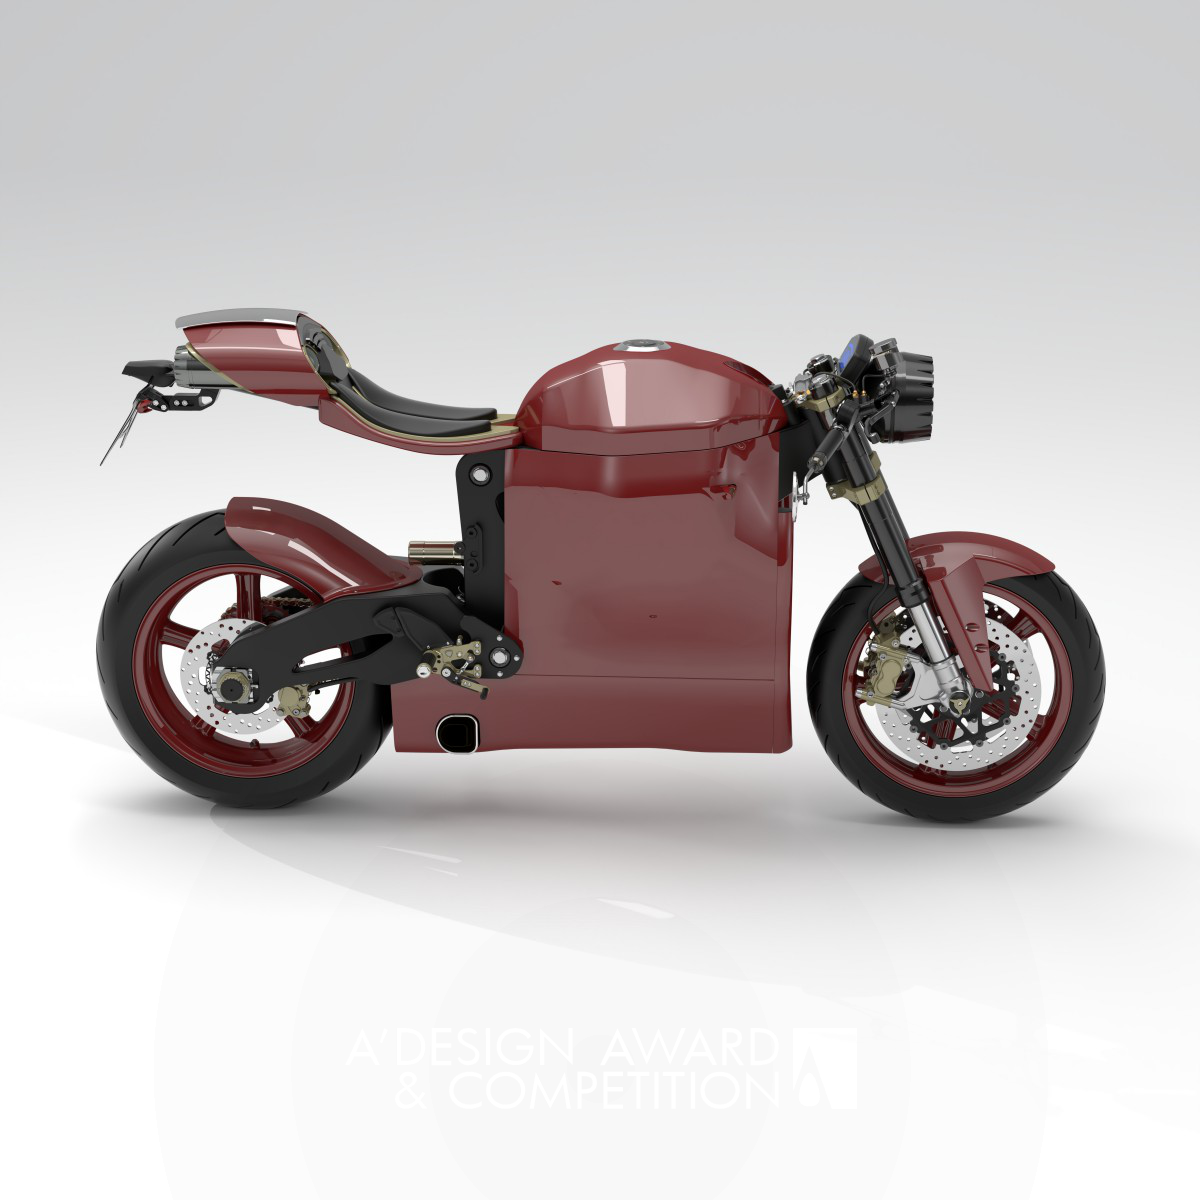 Marco Naccarella wins Bronze at the prestigious A' Vehicle, Mobility and Transportation Design Award with Atto Primo Motorcycle.